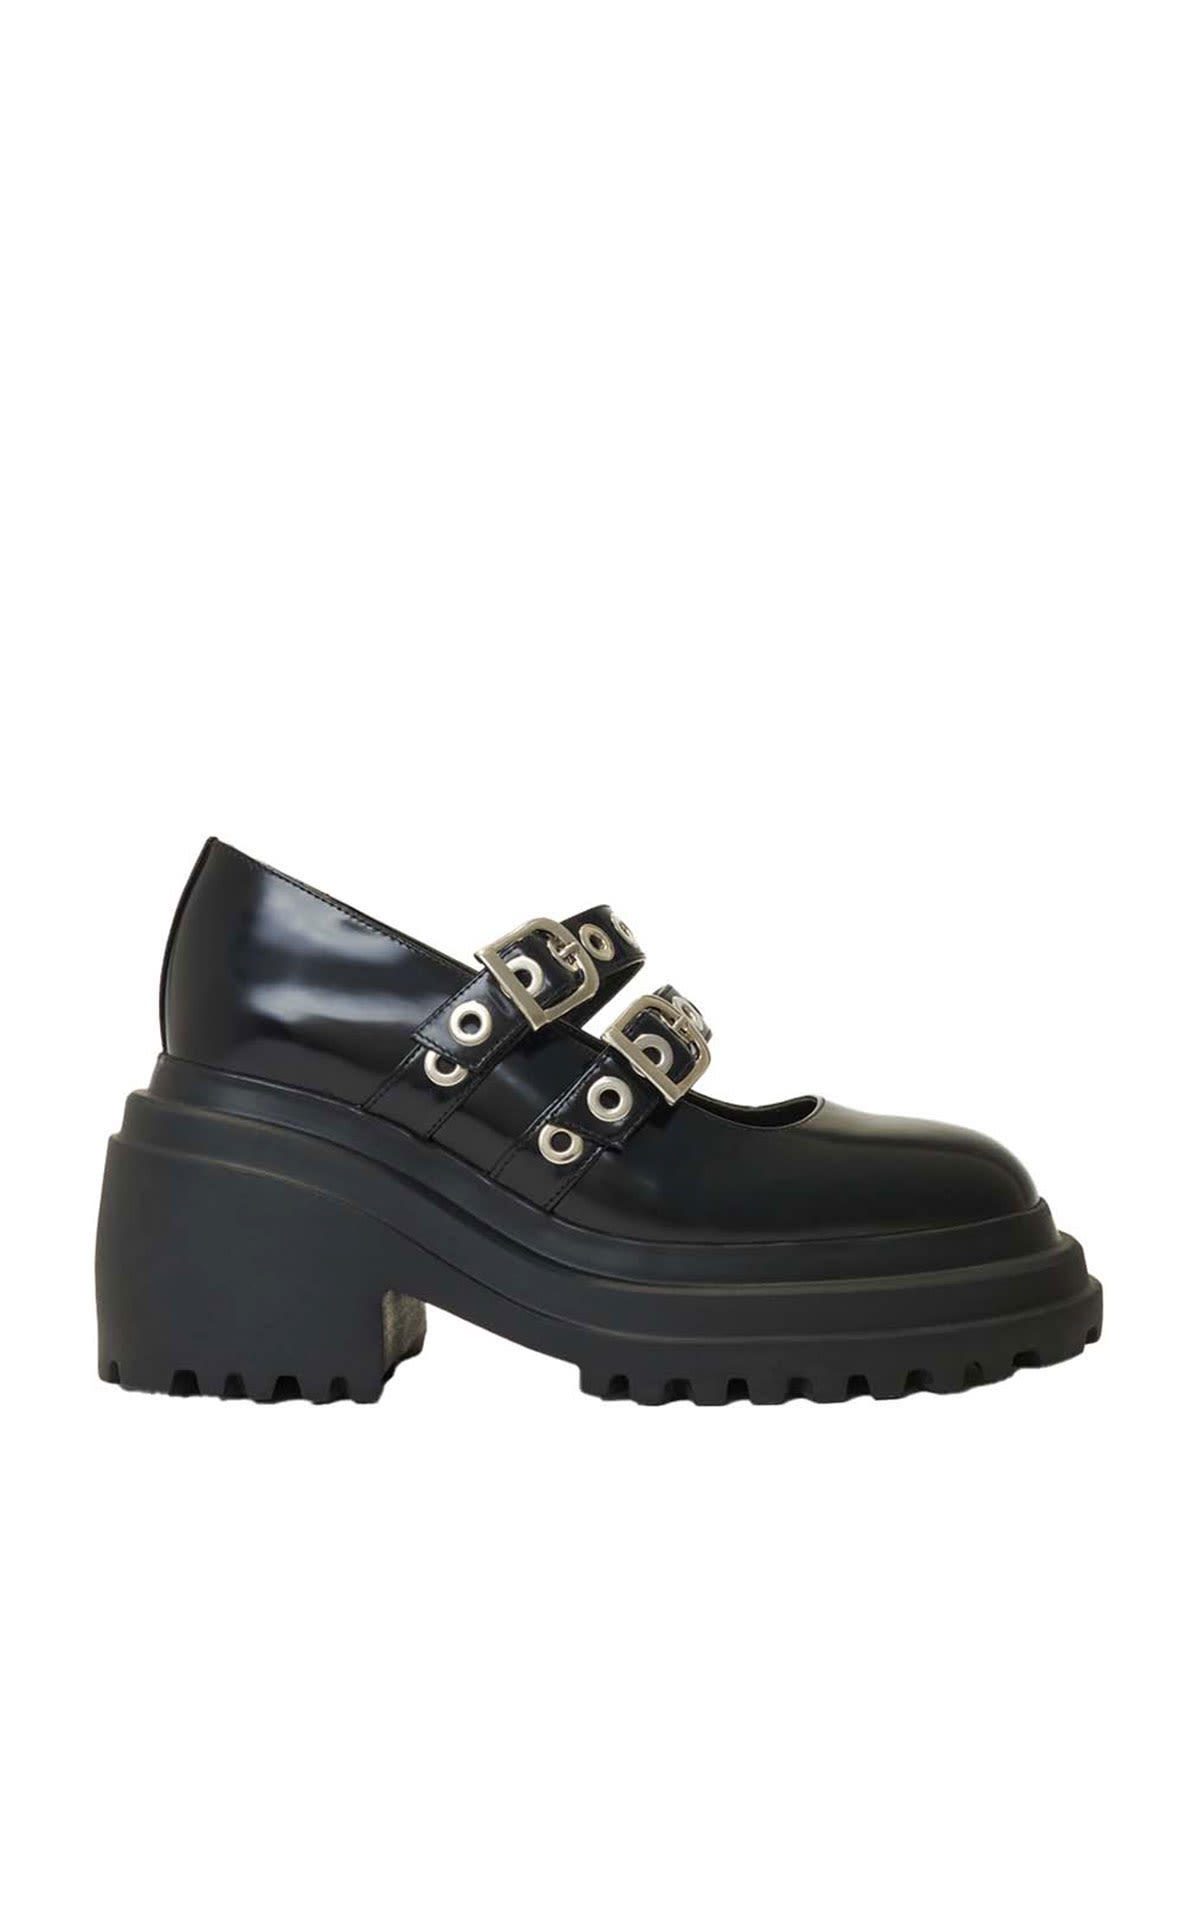 Black boot with buckles Maje